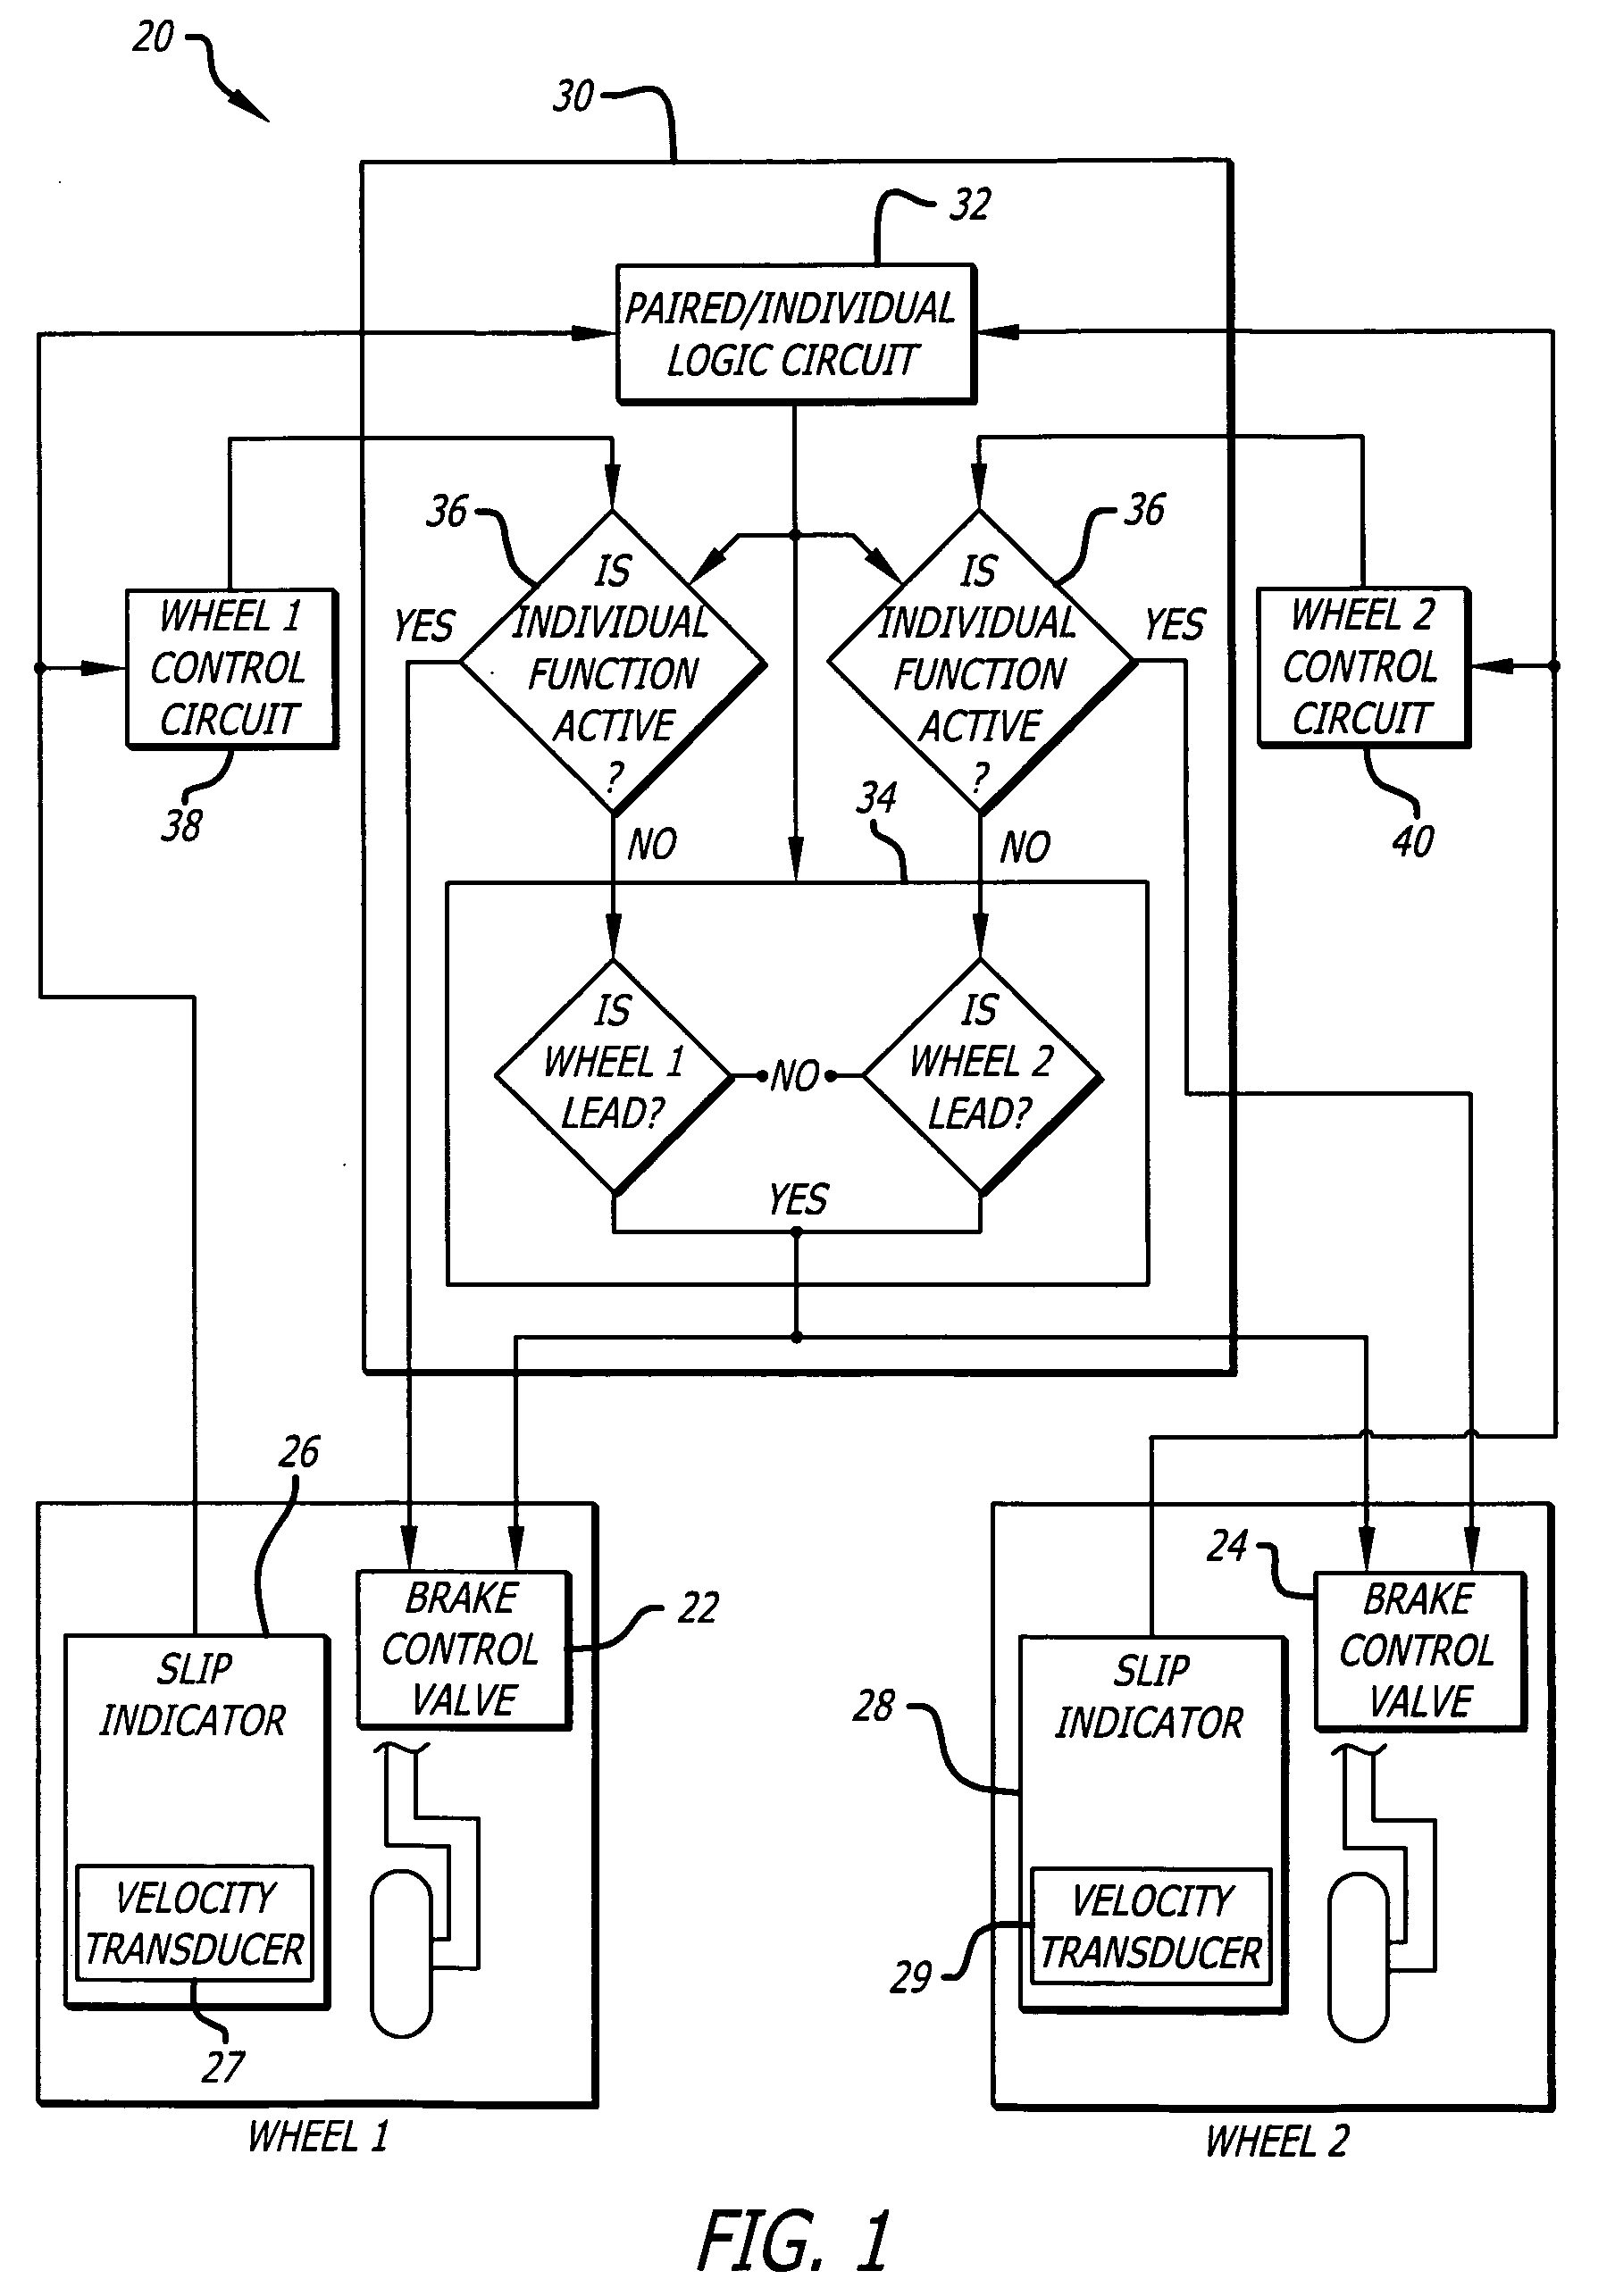 Antiskid control-combined paired/individual wheel control logic